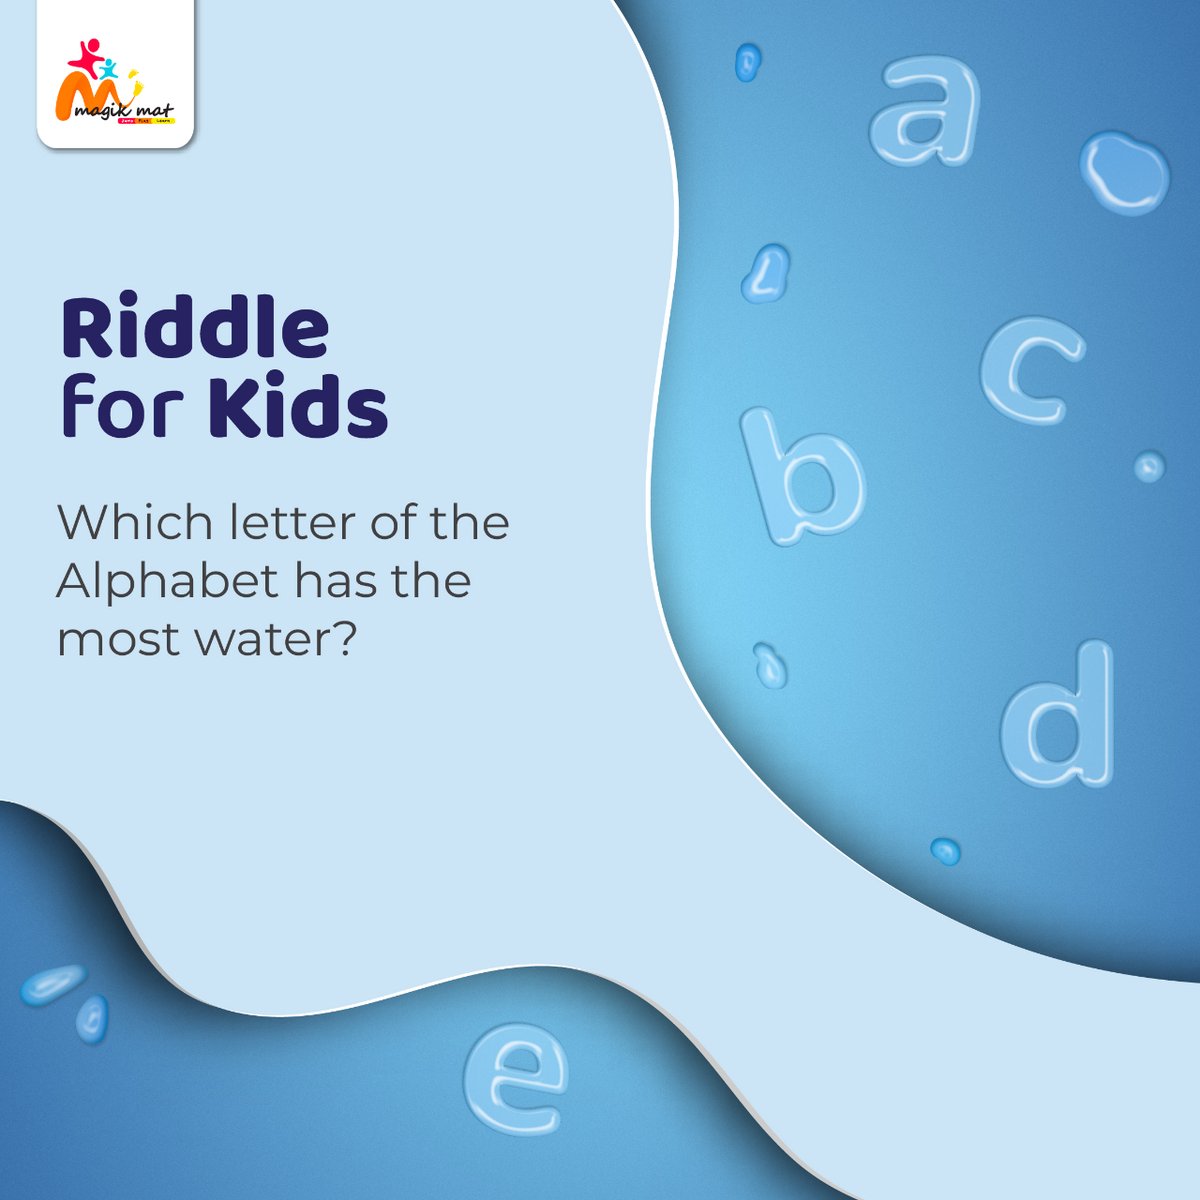 Riddle Time! Which letter of the alphabet has the most water? Leave your guess in the comments!

#Magikmat #learningthroughplay #RiddleMeThis #BrainTeaser #PuzzleFun #RiddleChallenge #MysterySolved #RiddleOfTheDay #GuessingGame #RiddleTime